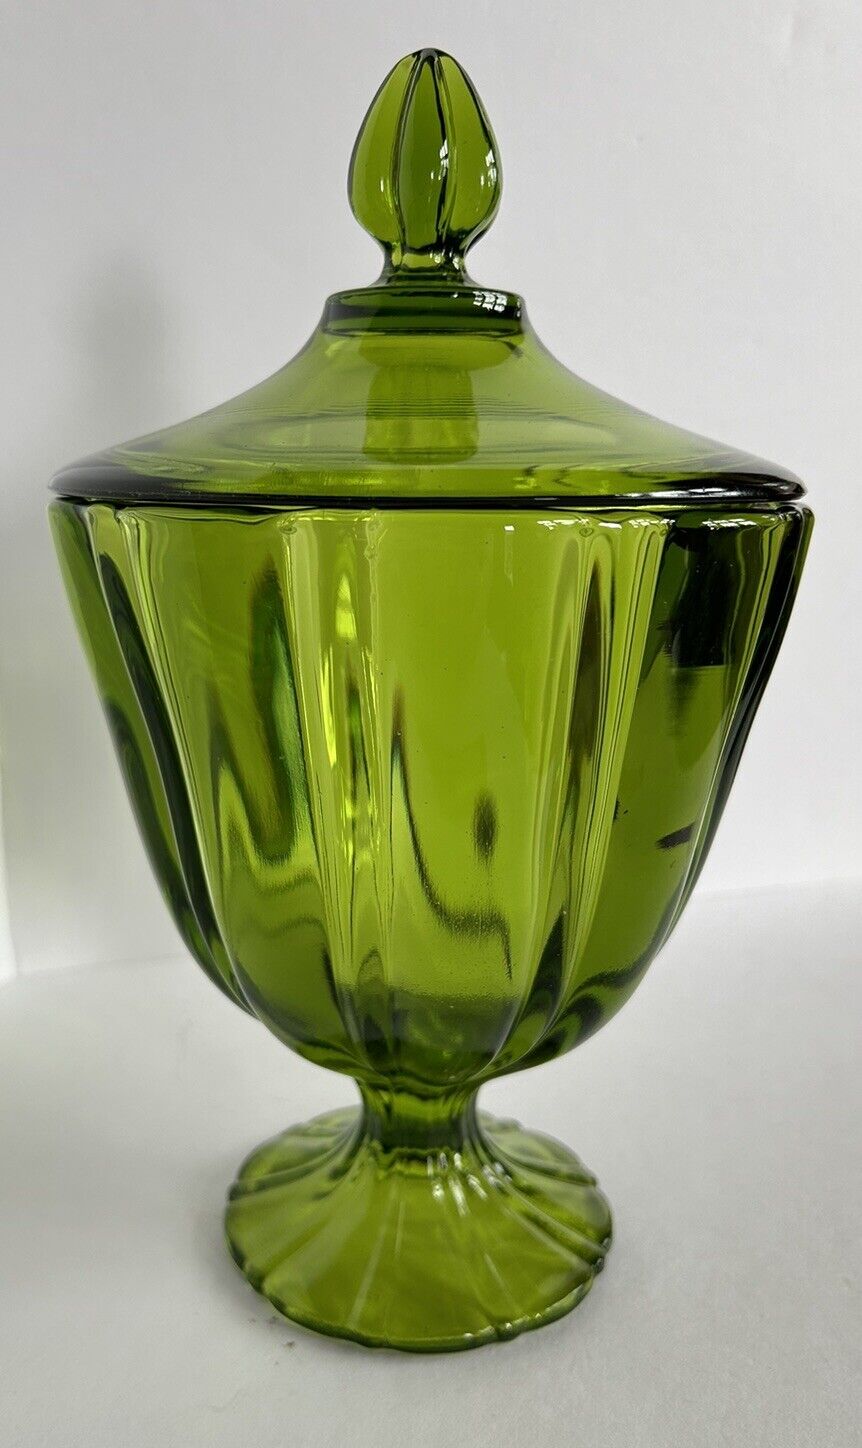 LE Smith Emerald Green Glass Large Covered Candy Dish Compote  10.5”